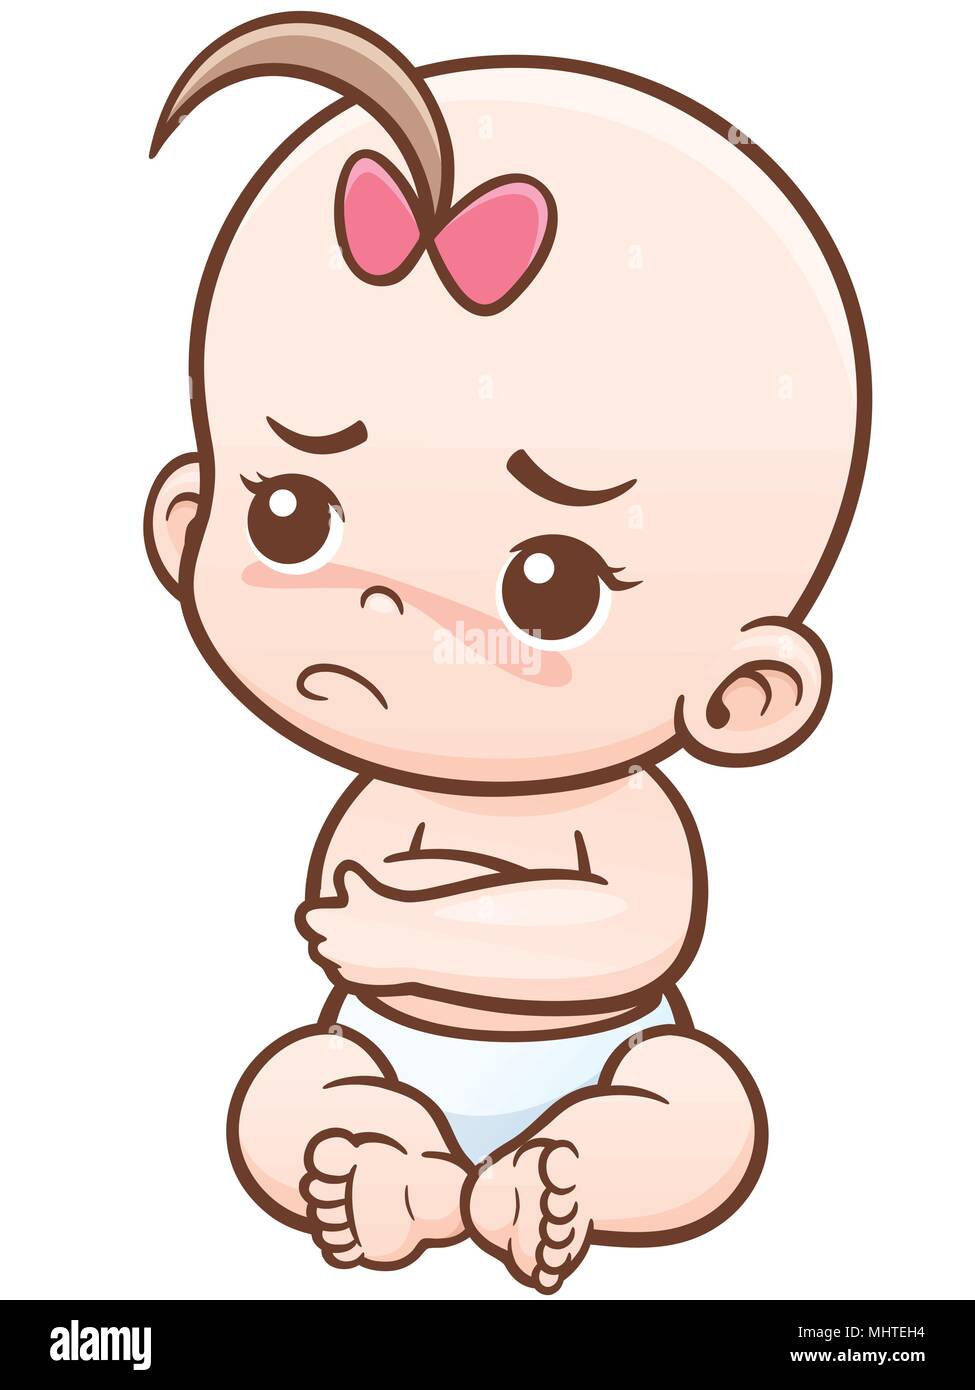 Vector Illustration of Cartoon Angry Baby Stock Vector